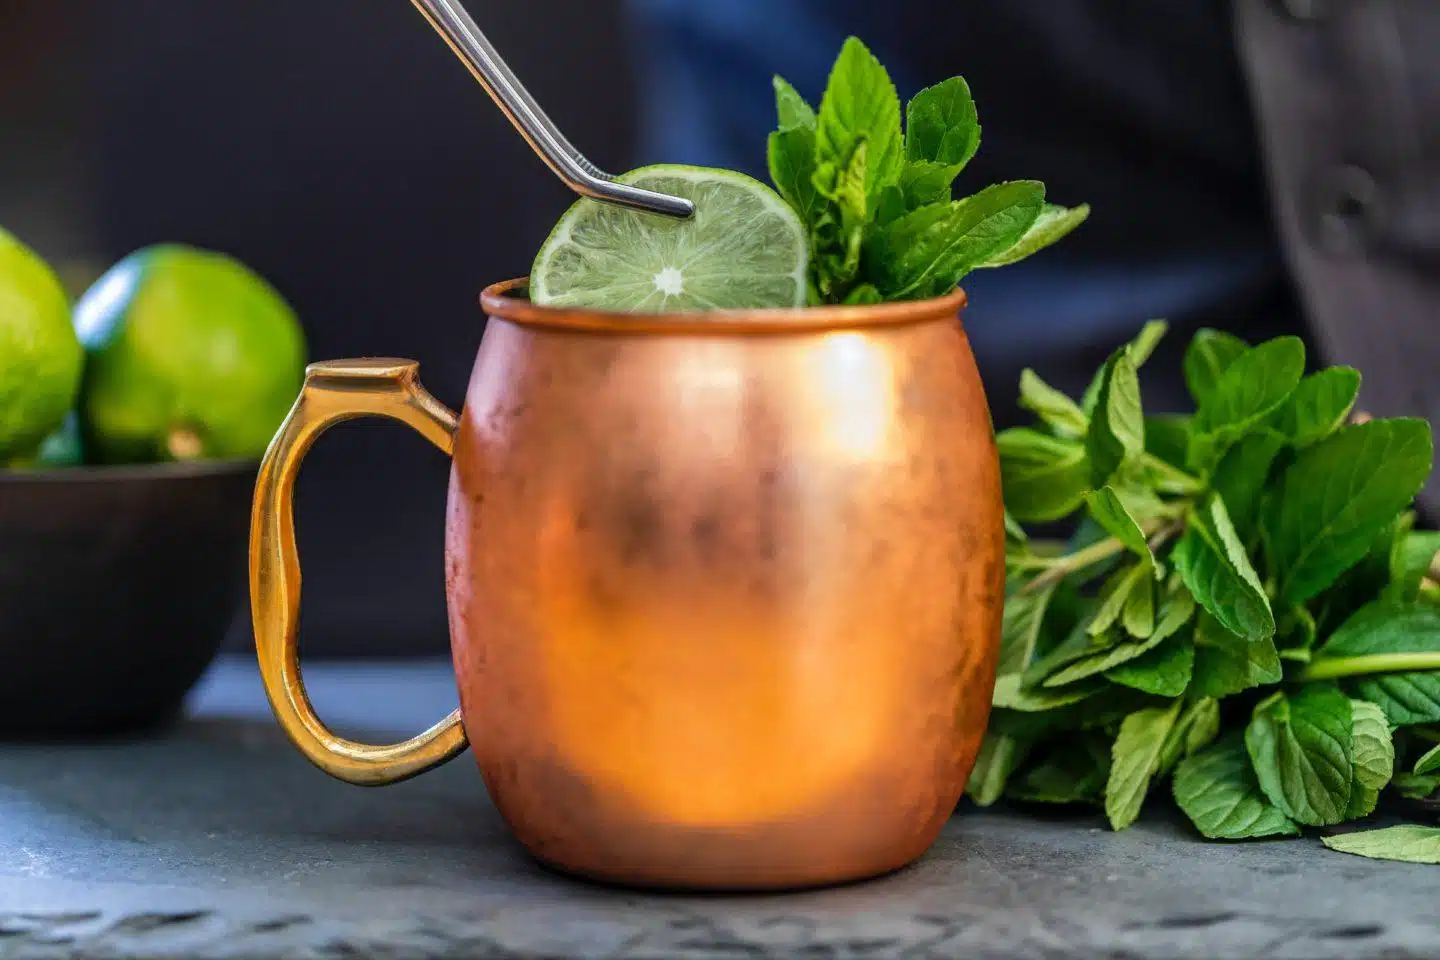 Moscow Mule ingredients, by lifestyle blogger What The Fab